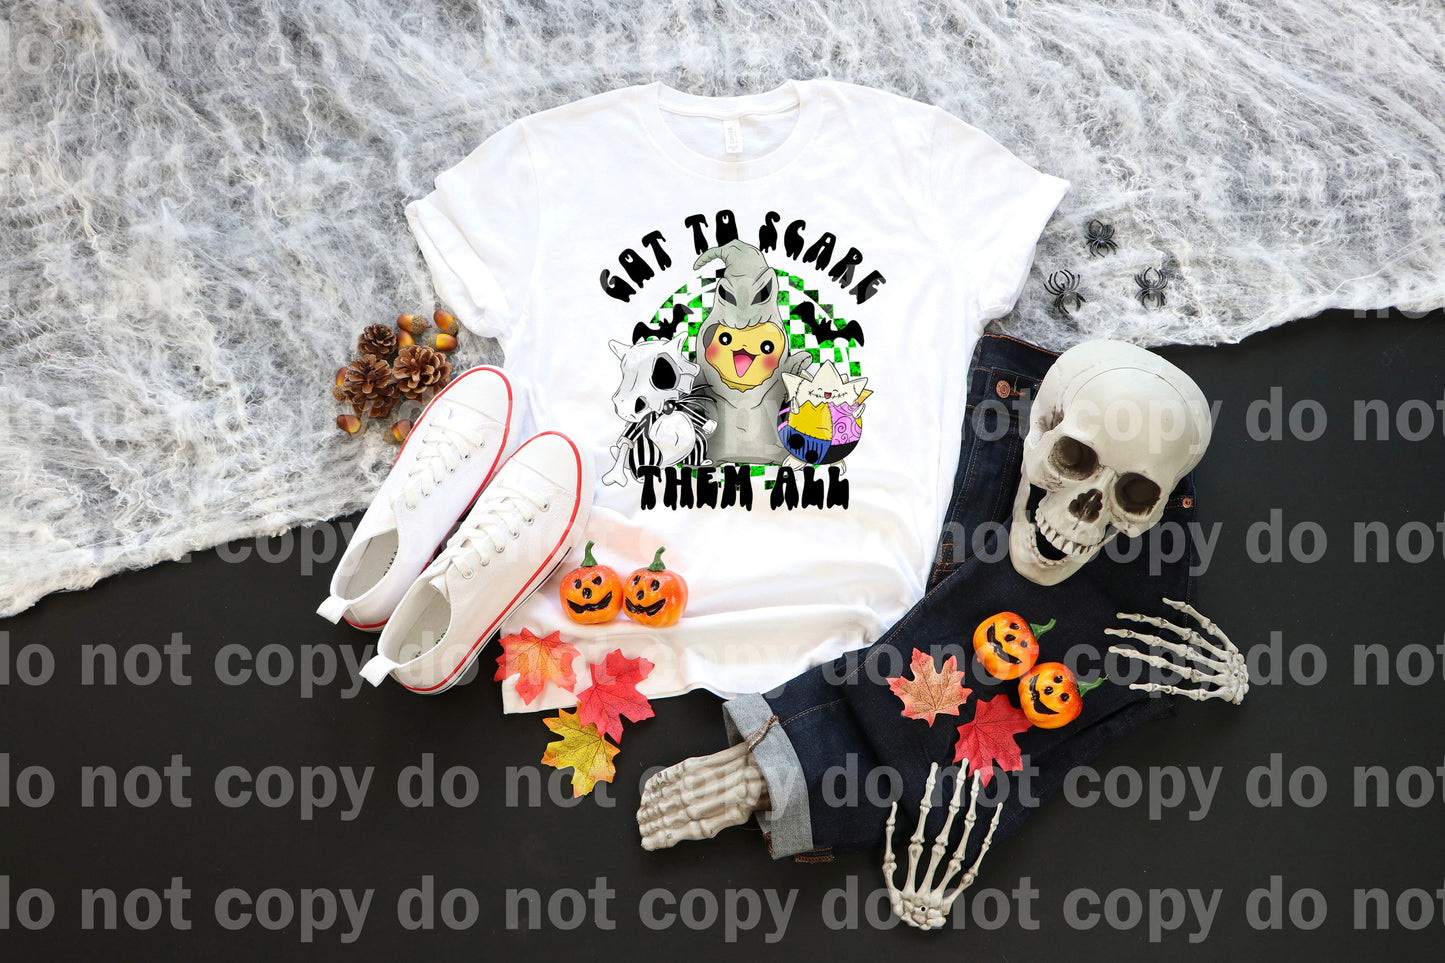 Got To Scare Them All Dream Print or Sublimation Print